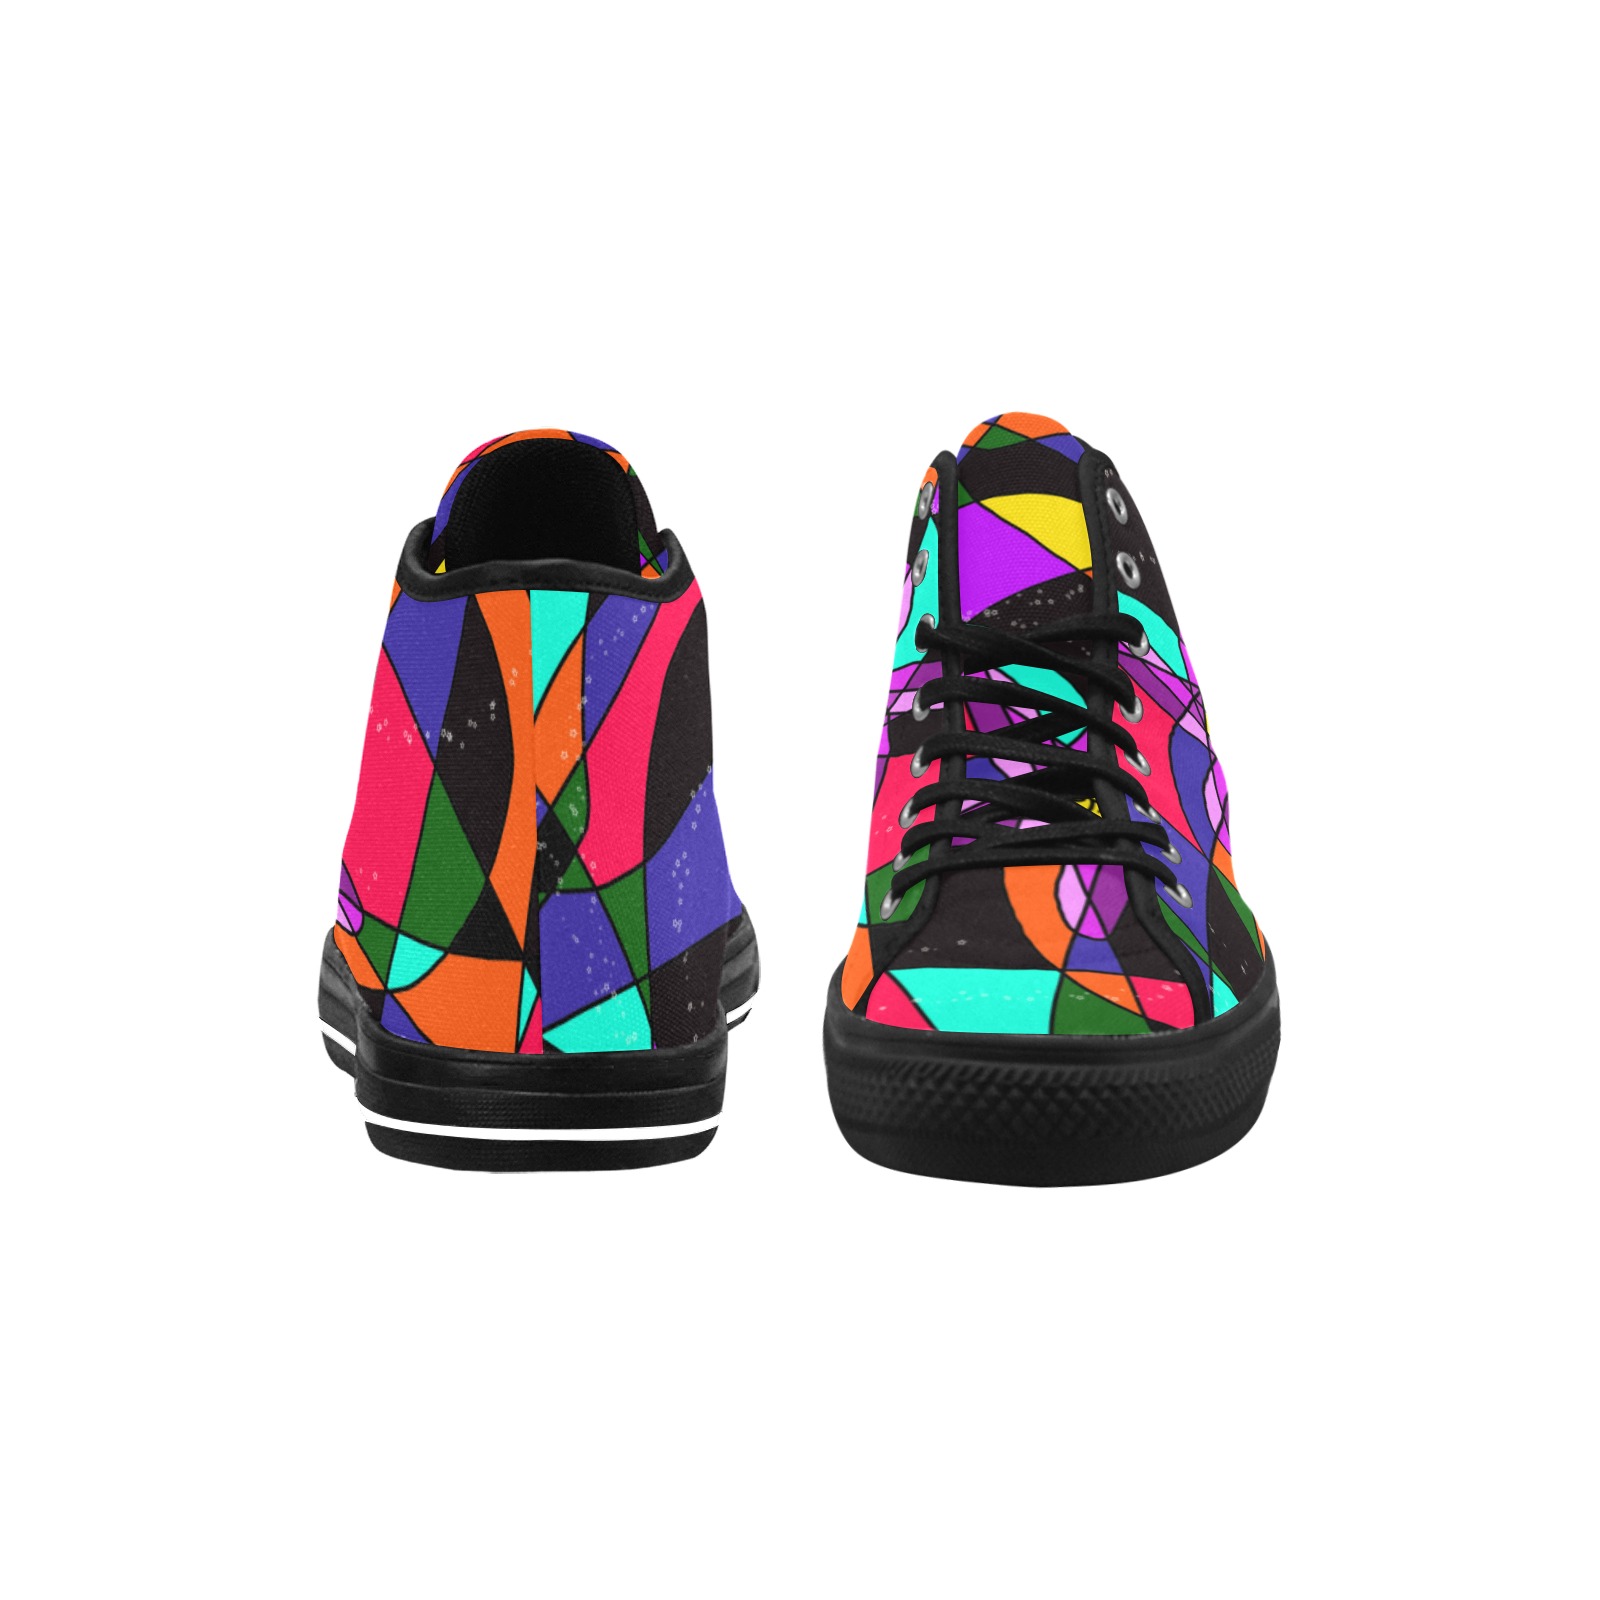 Abstract Design S 2020 Vancouver H Women's Canvas Shoes (1013-1)